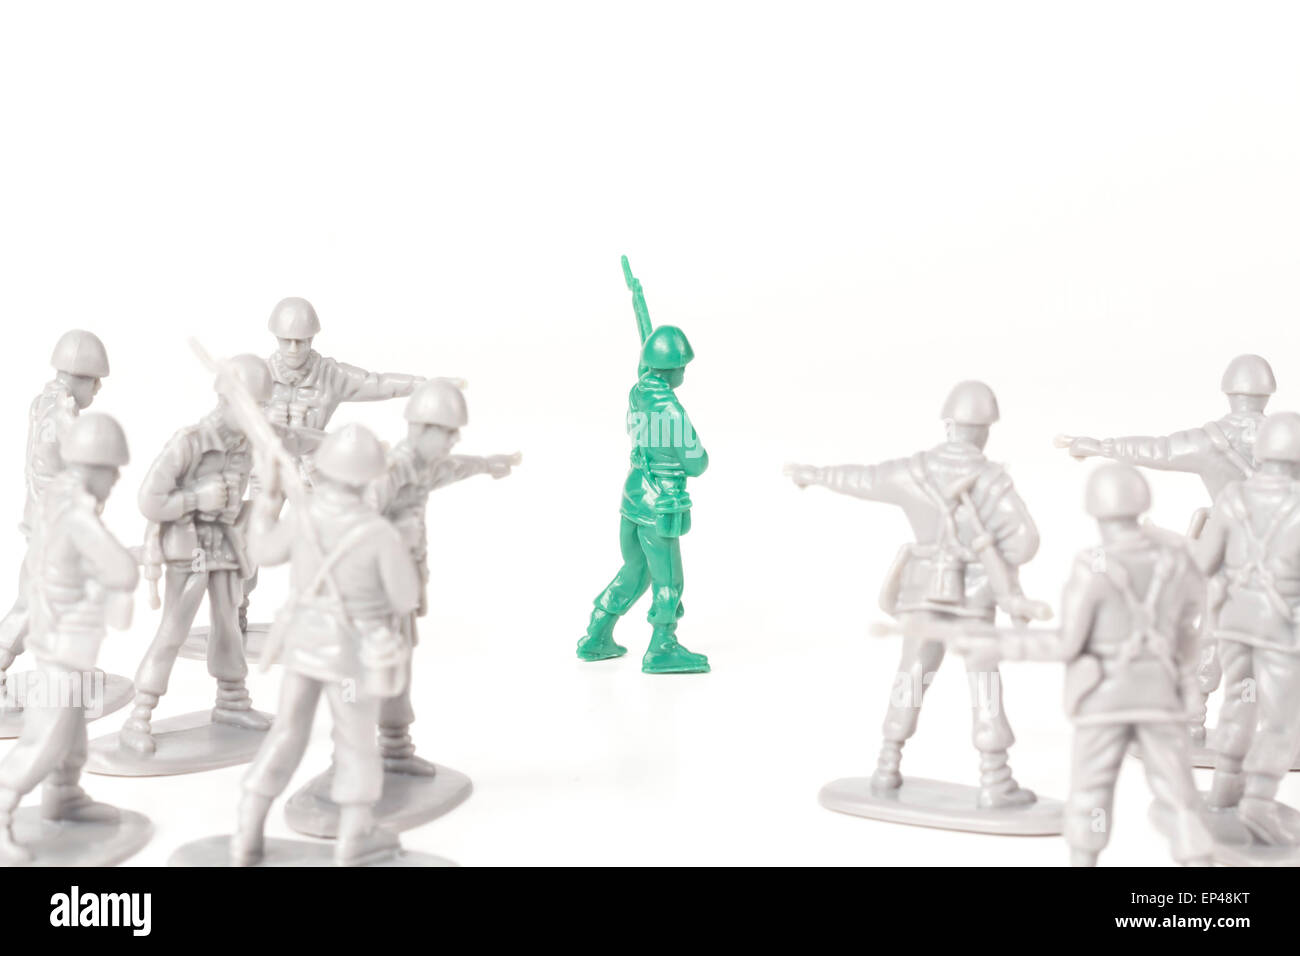 Gray toy soldiers pointing and bullying a green toy soldier Stock Photo